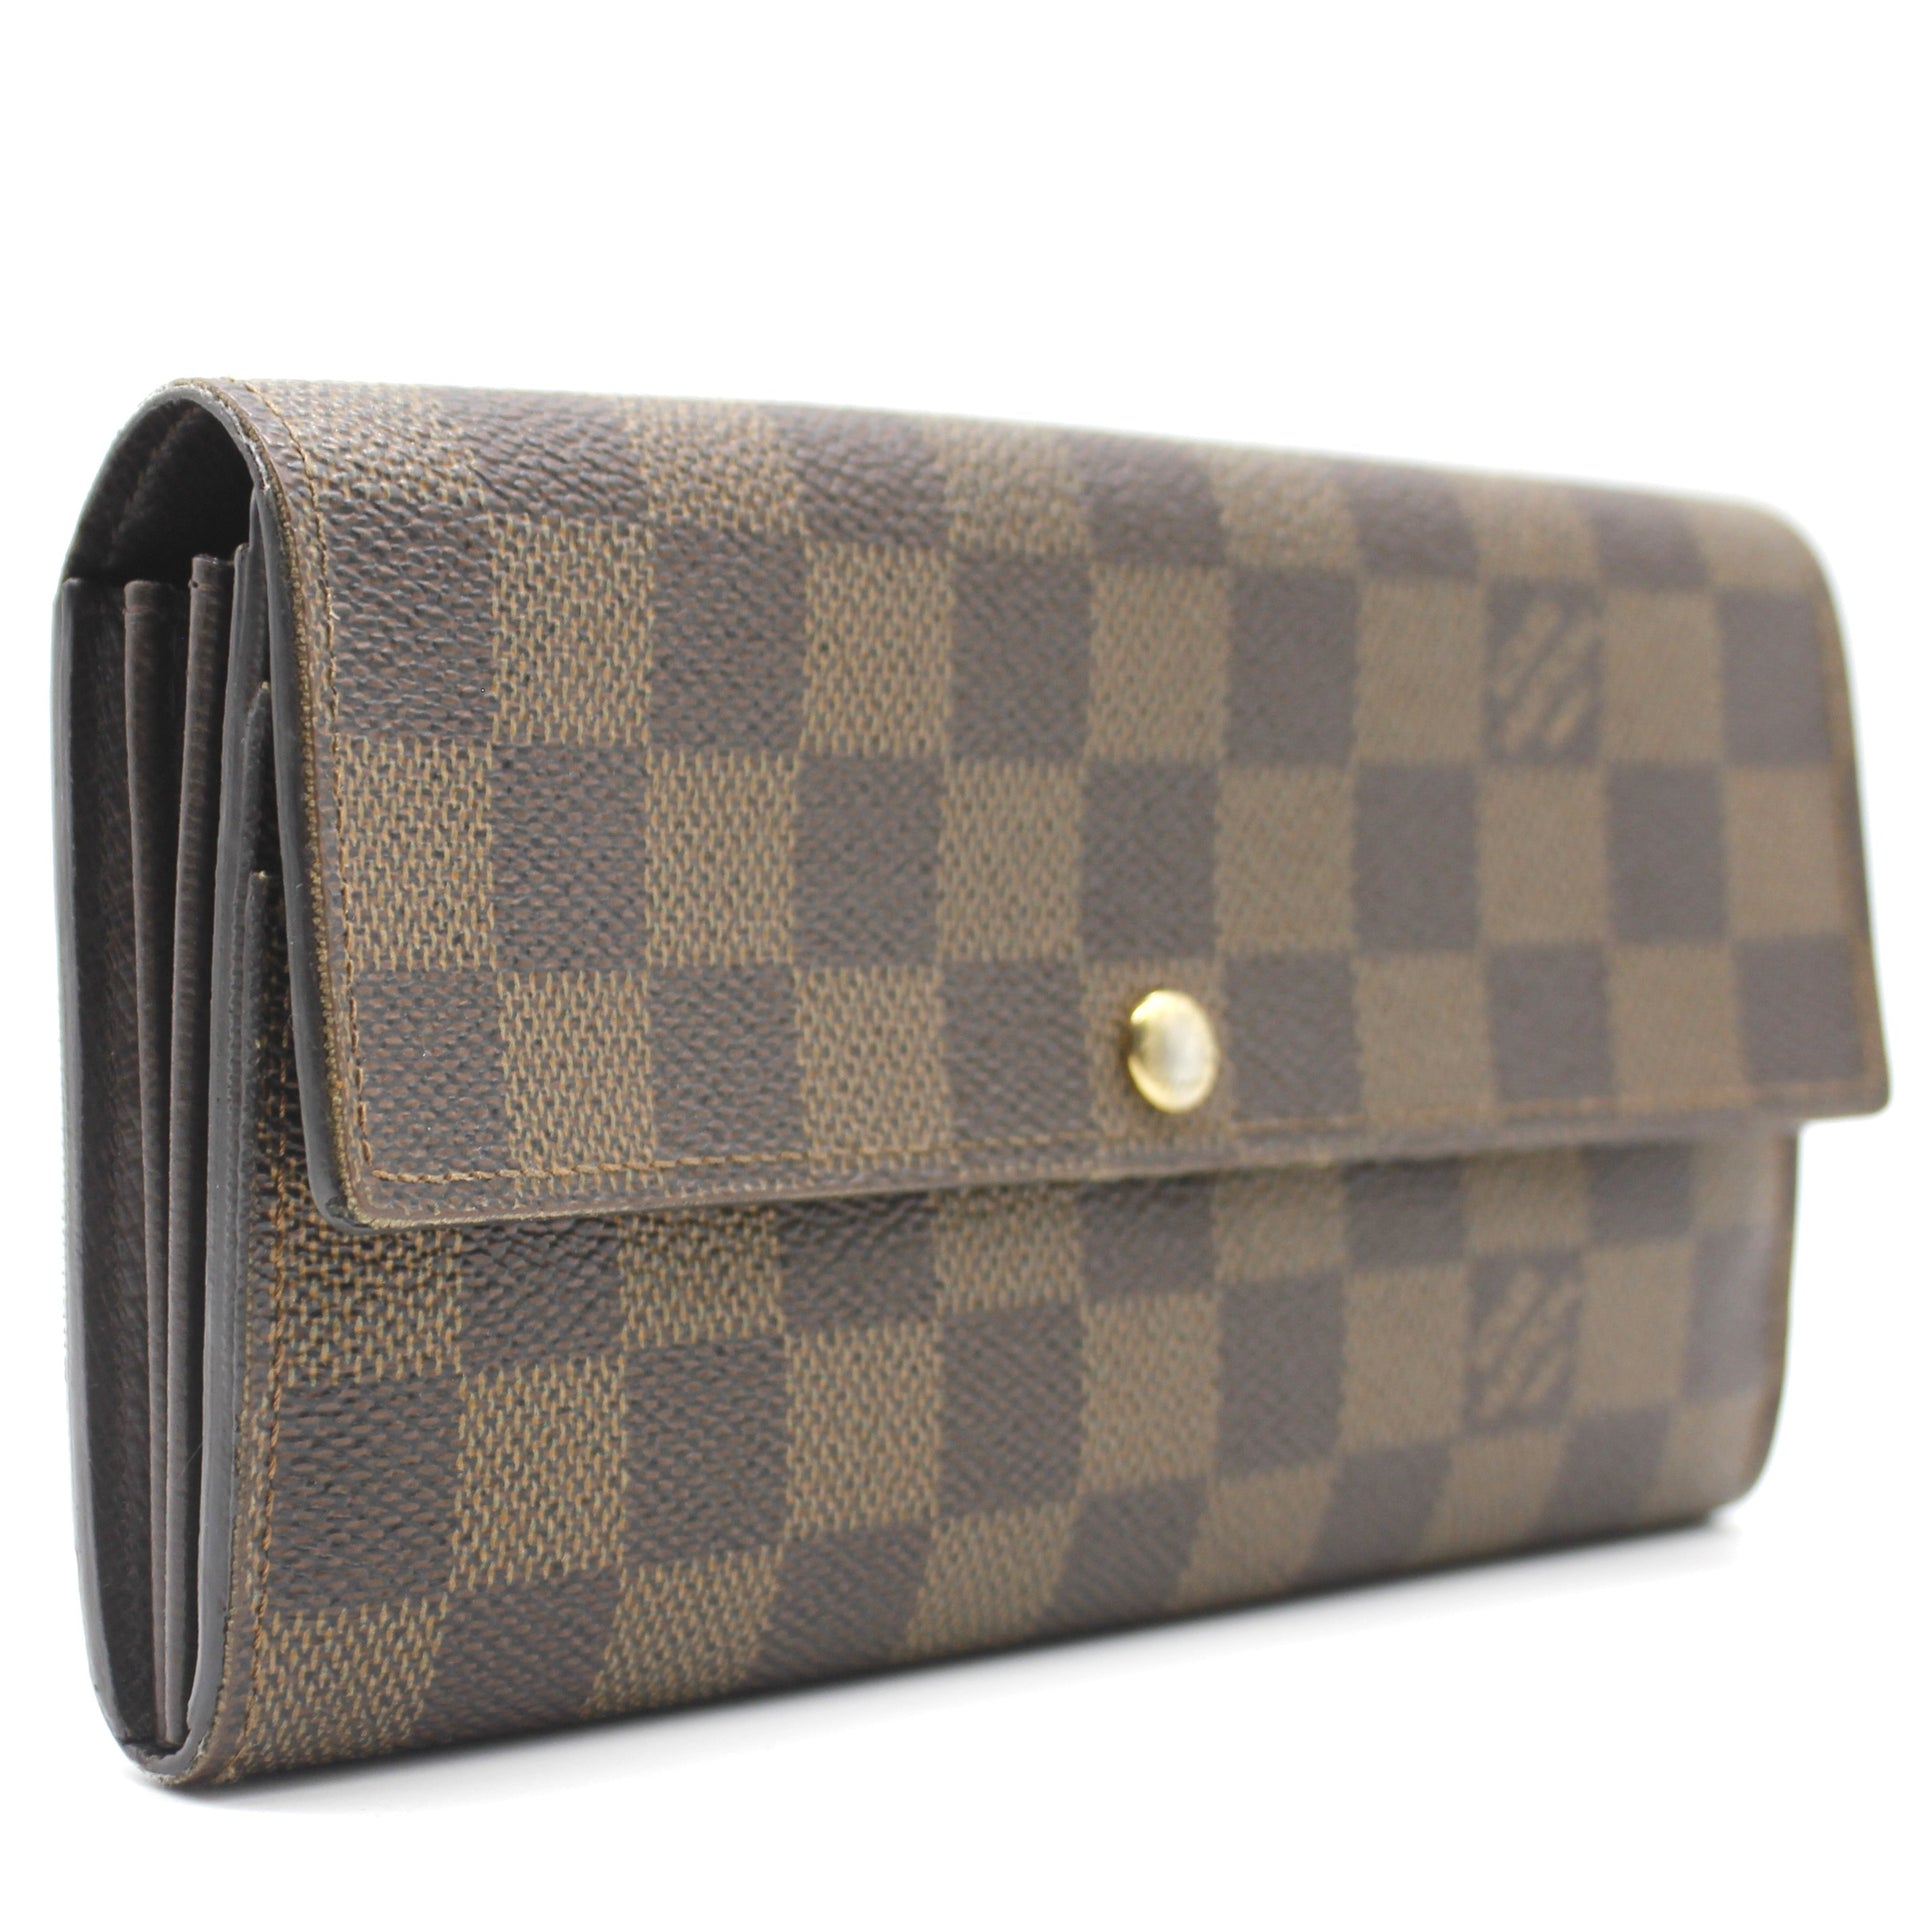 Sarah Wallet Damier Ebene  Wallets and Small Leather Goods  LOUIS VUITTON